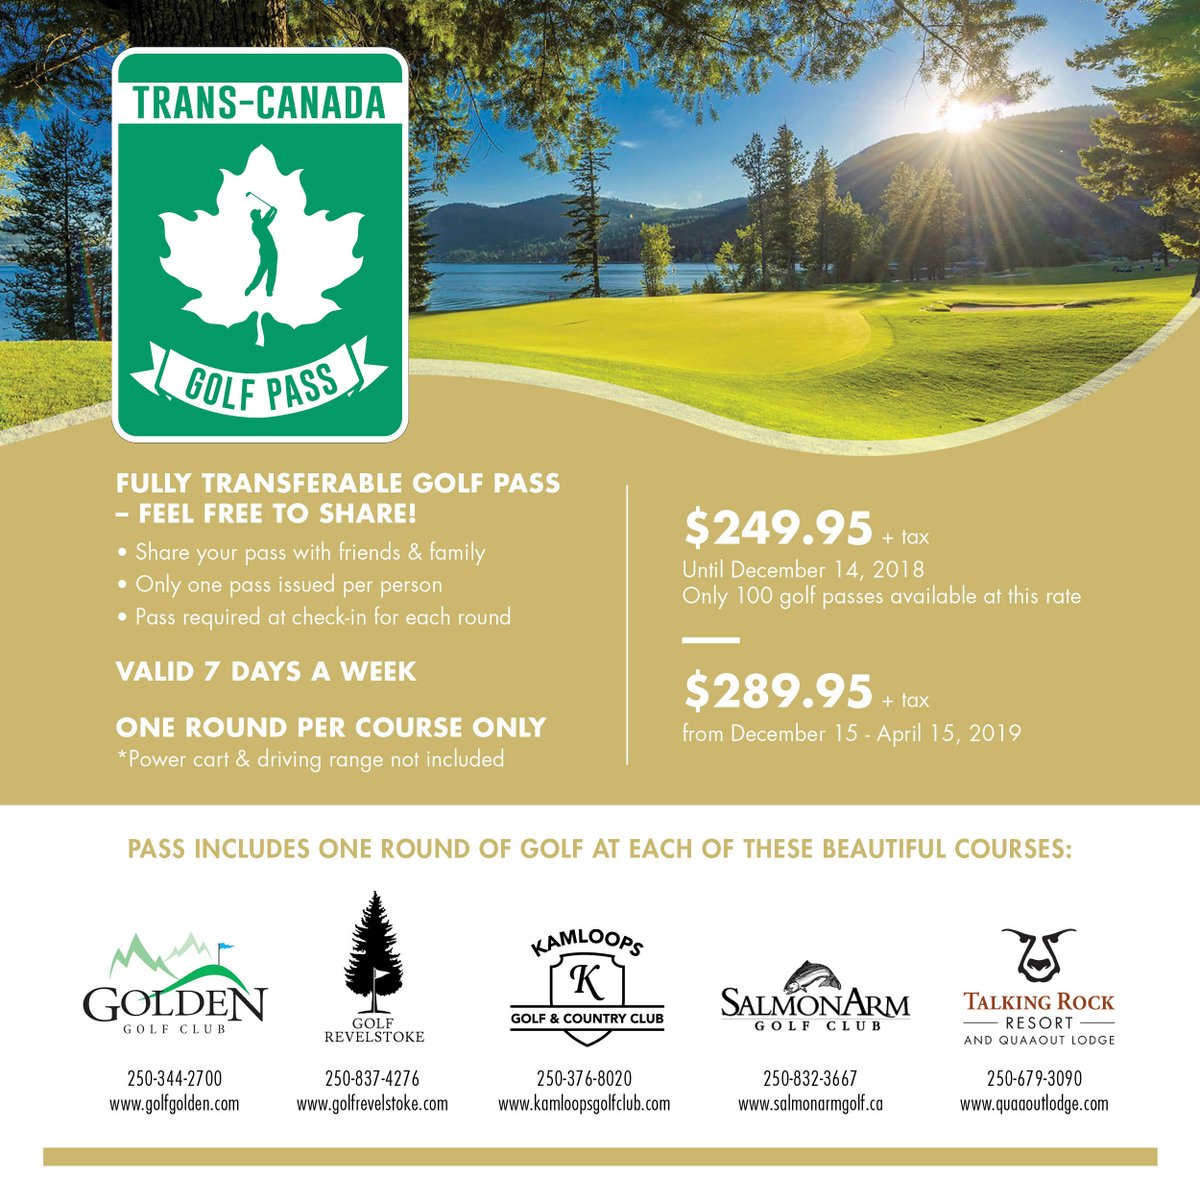 The 2019 Trans Canada Golf Pass is now on sale!

Perfect gift for the golfer in your life or even yourself.
.
#TransCanadaGolfPass
.
.
.
.
@TourismGolden, @SeeRevelstoke, @shuswaptourism, @tourismkamloops, @HelloBC, @KootRocks, @pgabc, @pgaofcanada, @ngcoacanada